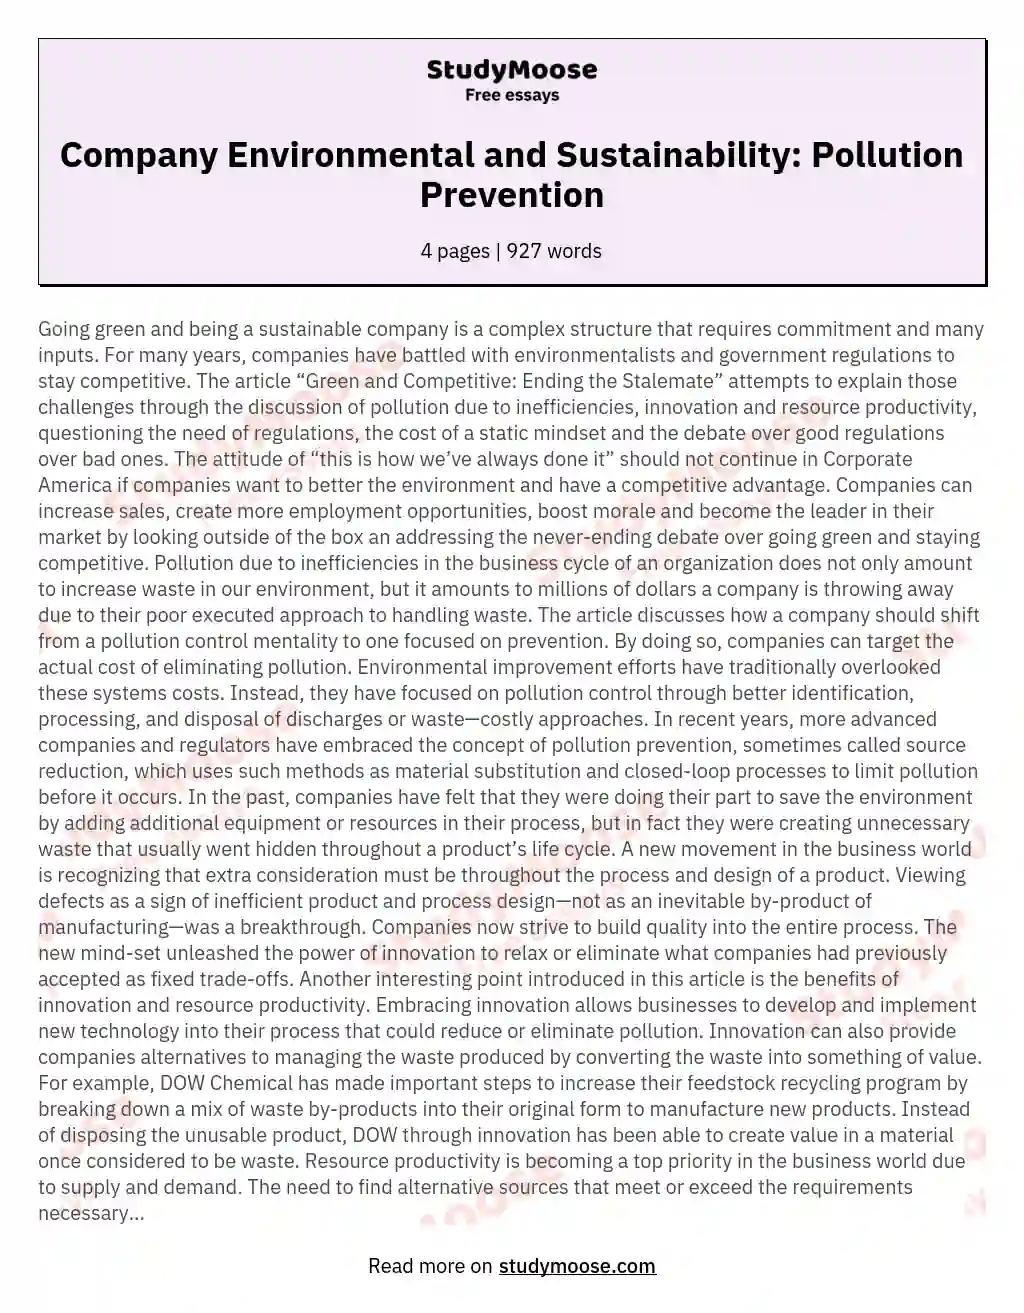 Company Environmental and Sustainability: Pollution Prevention essay